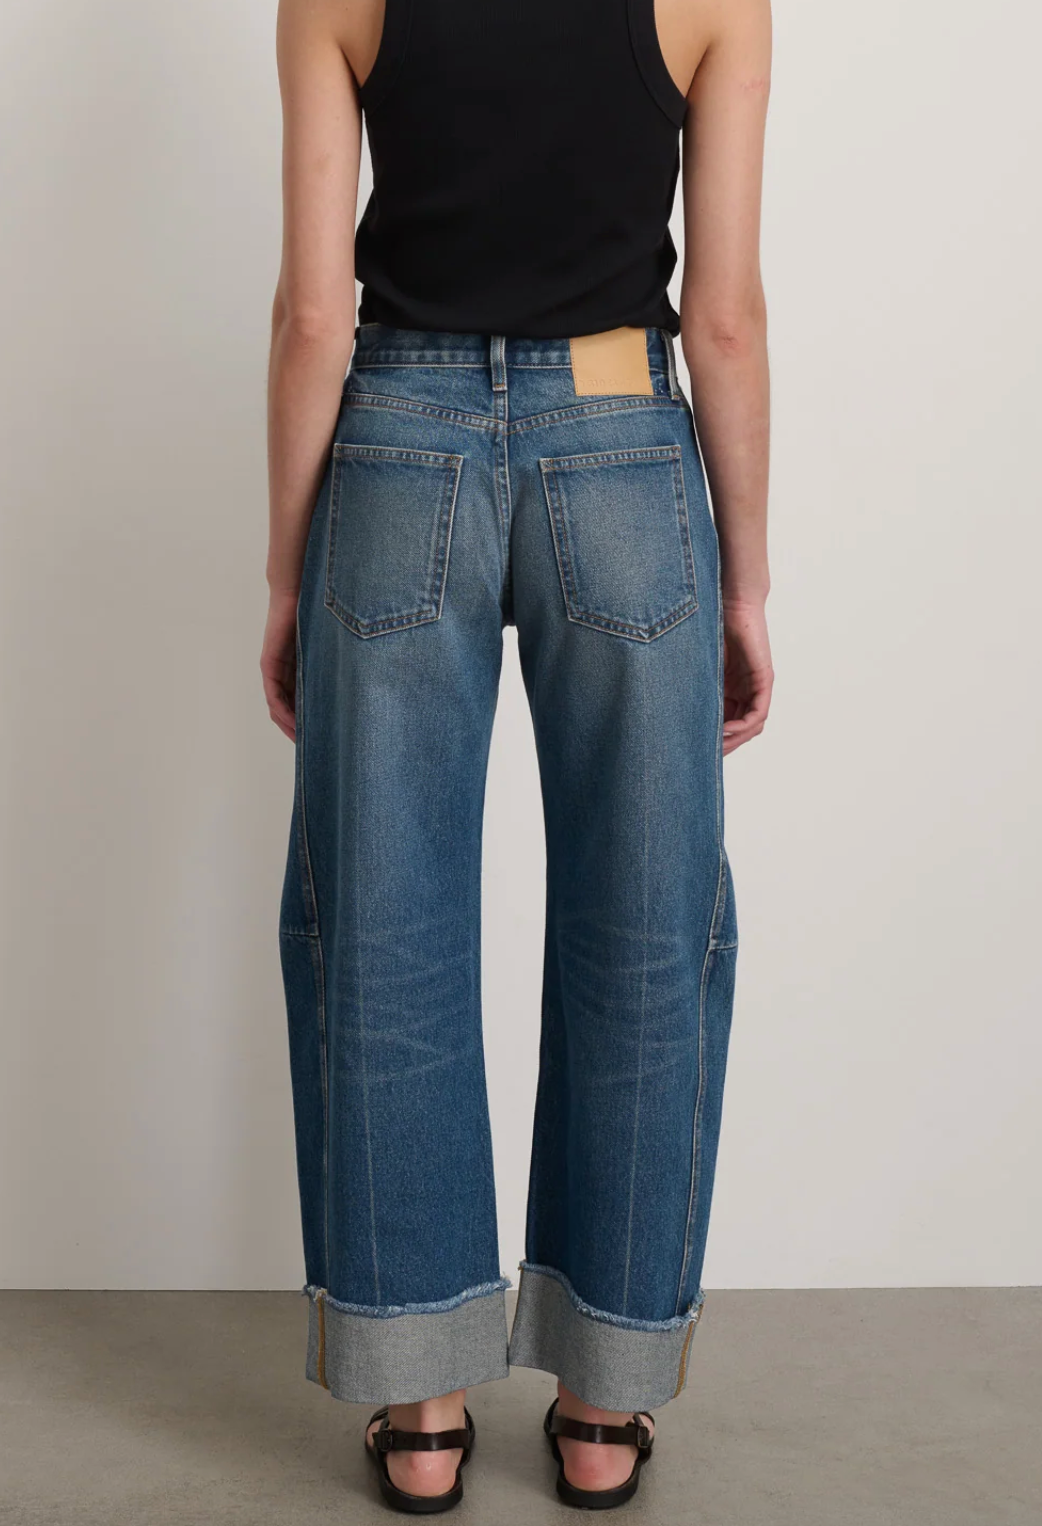 B Sides - Relaxed Lasso Vista Blue Jeans - Image 4